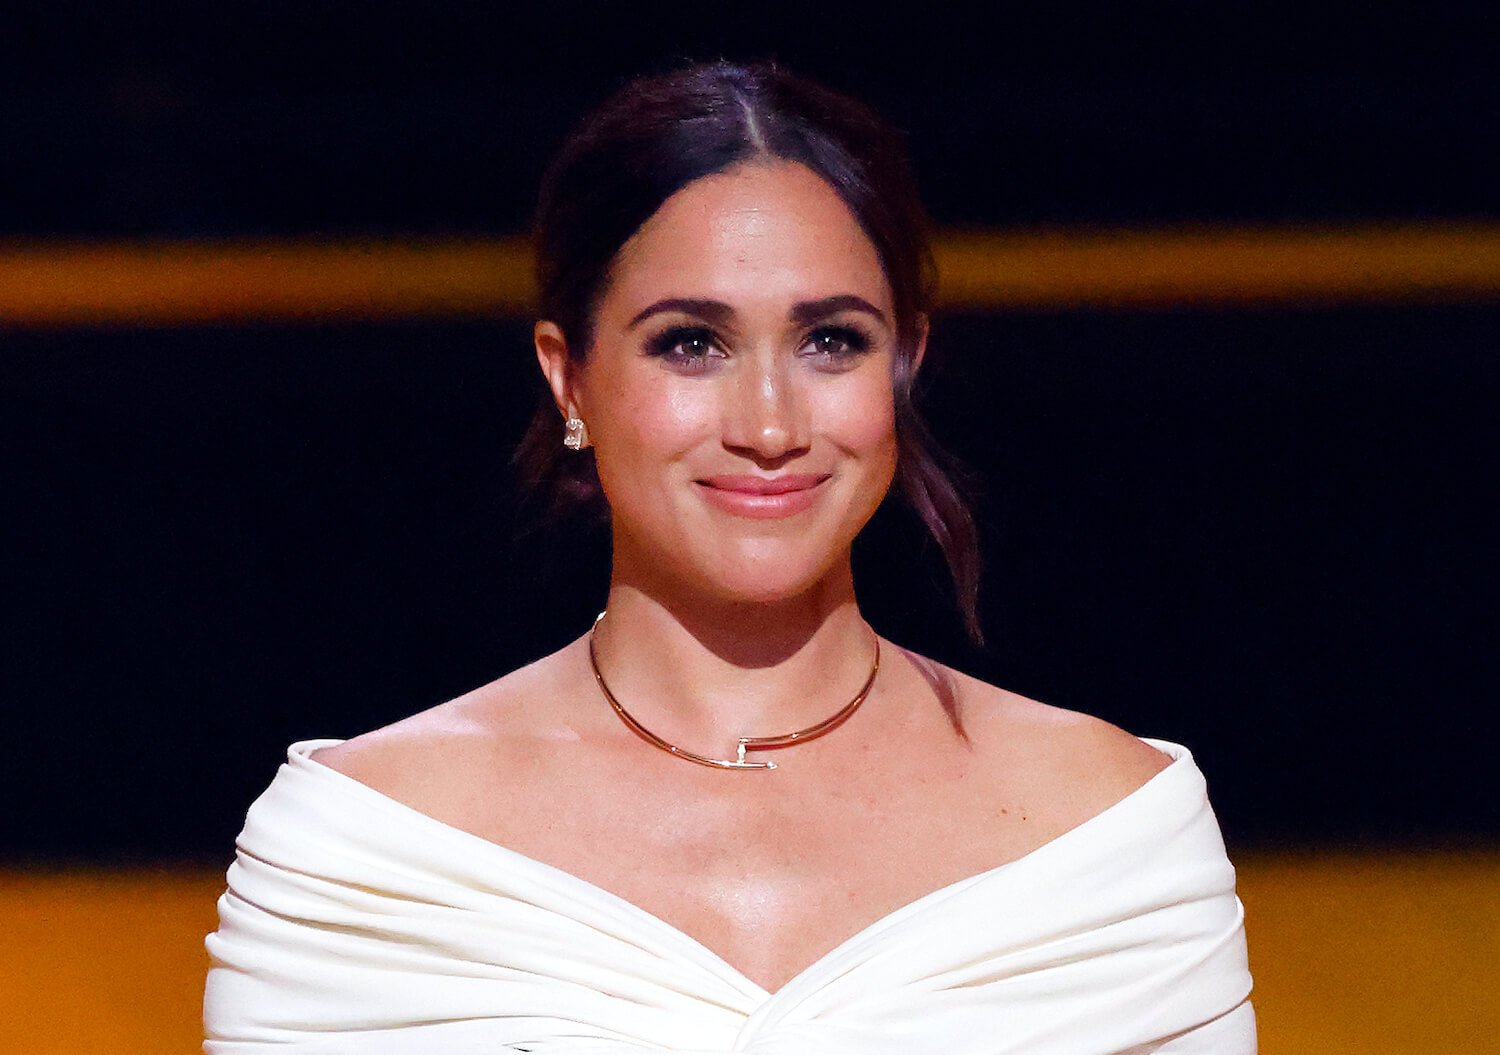 Meghan Markle smiles while wearing a white shoulder skimming top